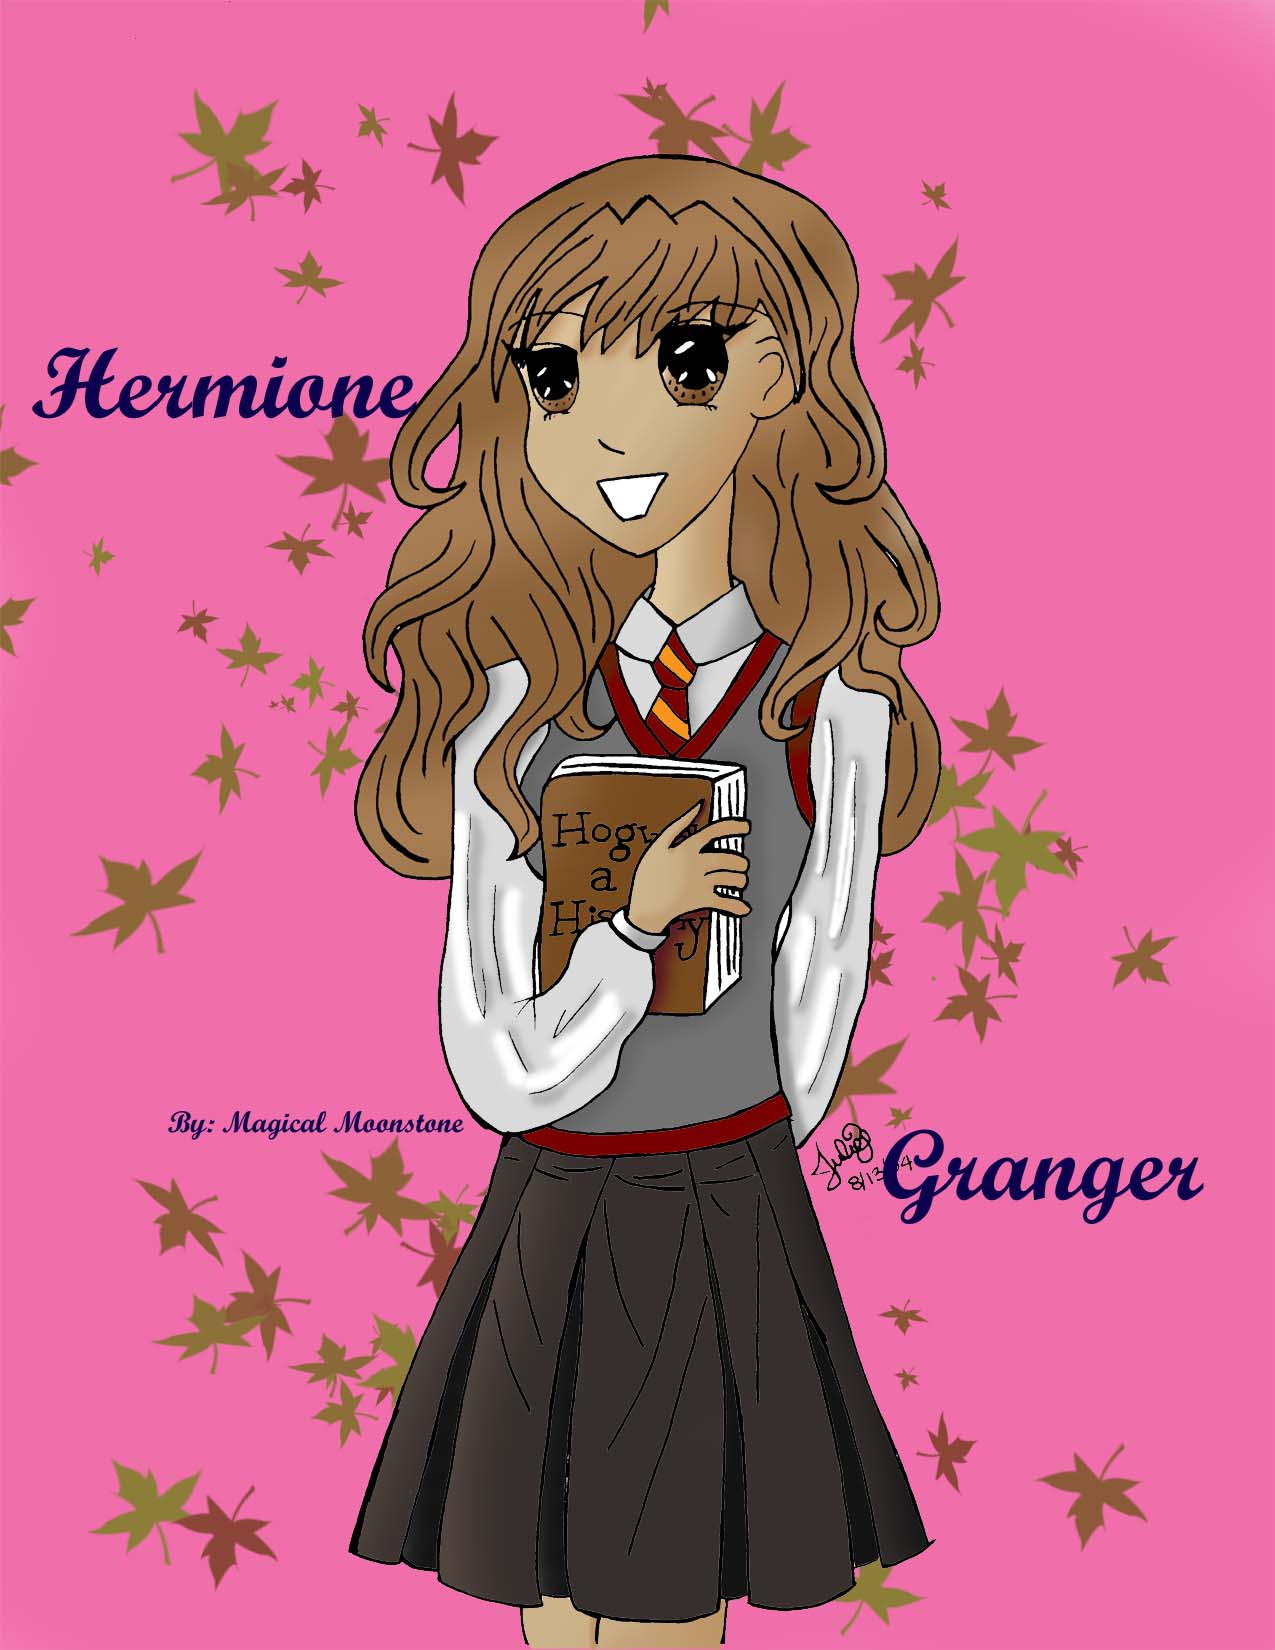 Hermione by magical_moonstone